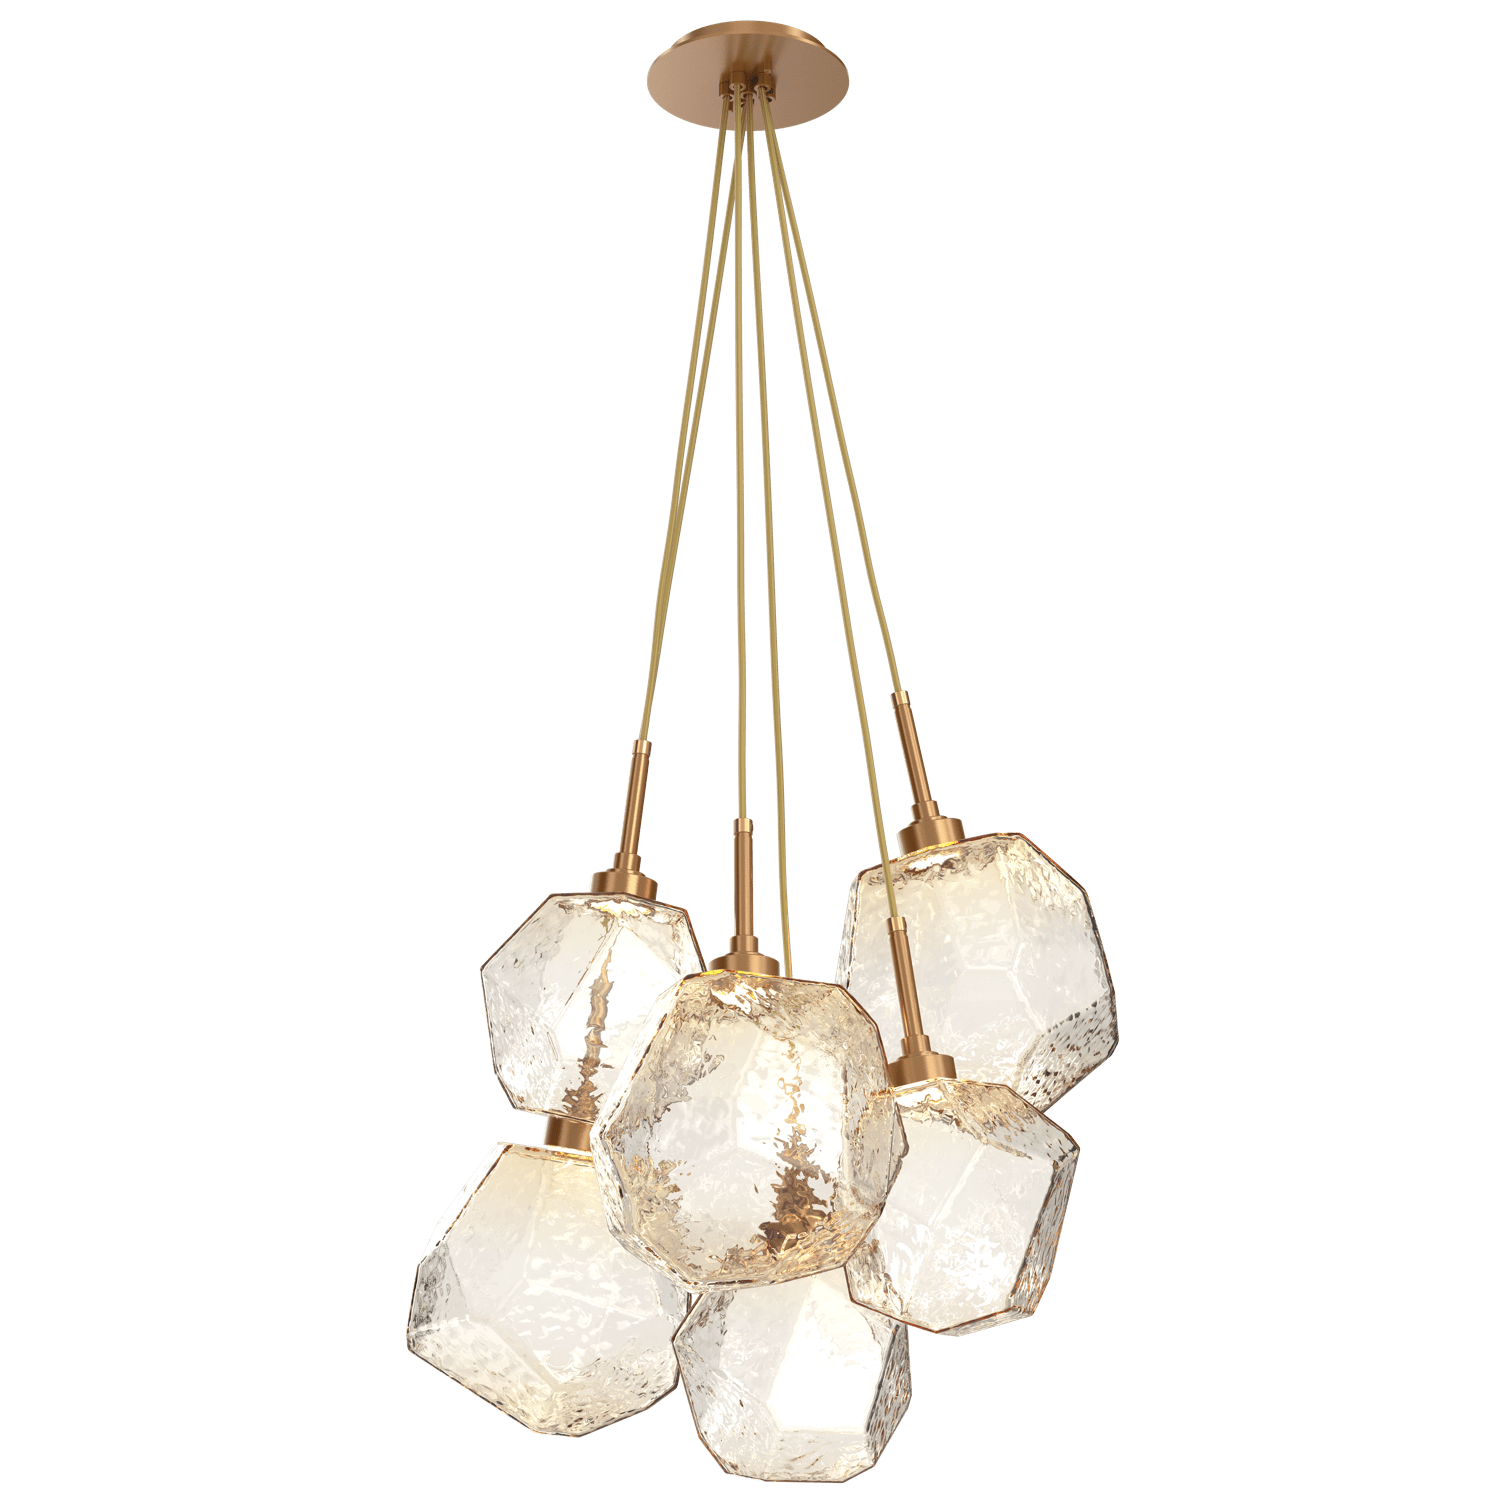 CHB0039-0F-NB-A-Hammerton-Studio-Gem-6-light-cluster-pendant-light-with-novel-brass-finish-and-amber-blown-glass-shades-and-LED-lamping